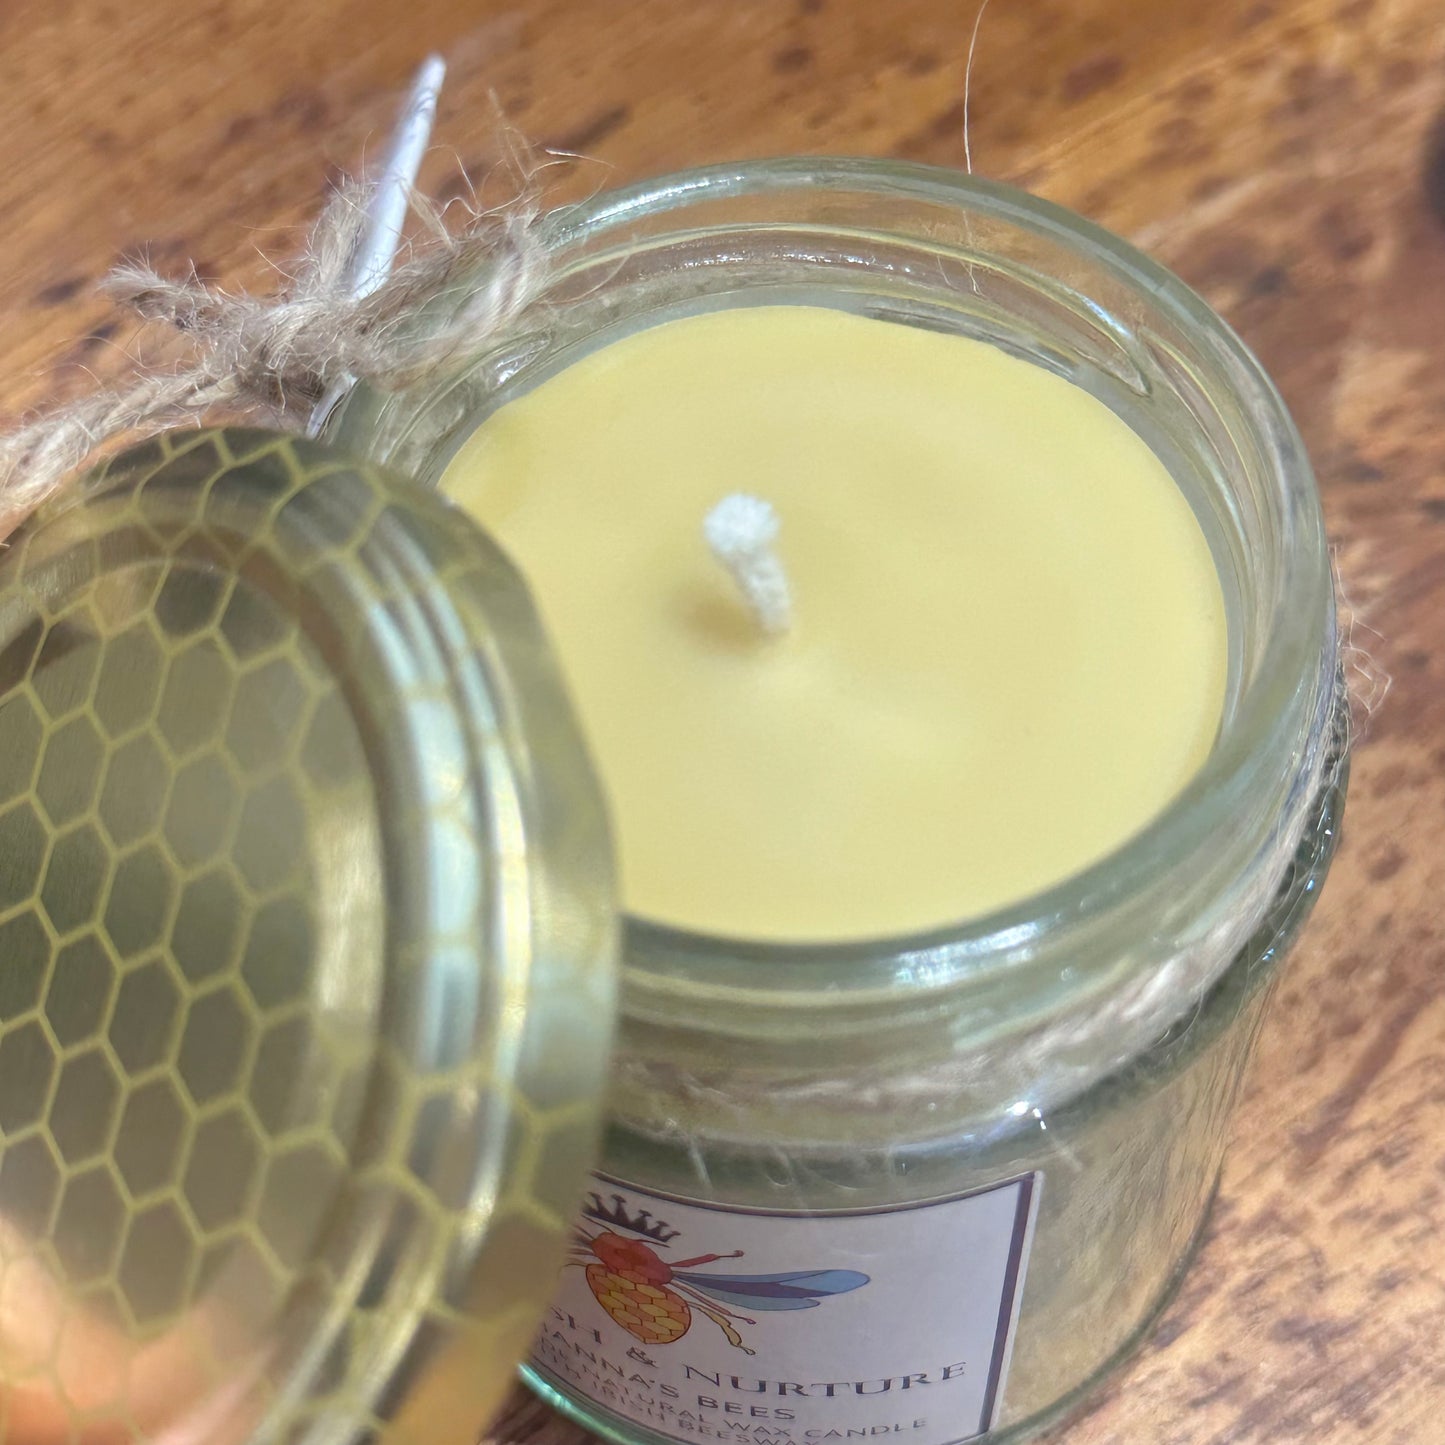 Hanna's Bees Natural Wax Candle in a jar